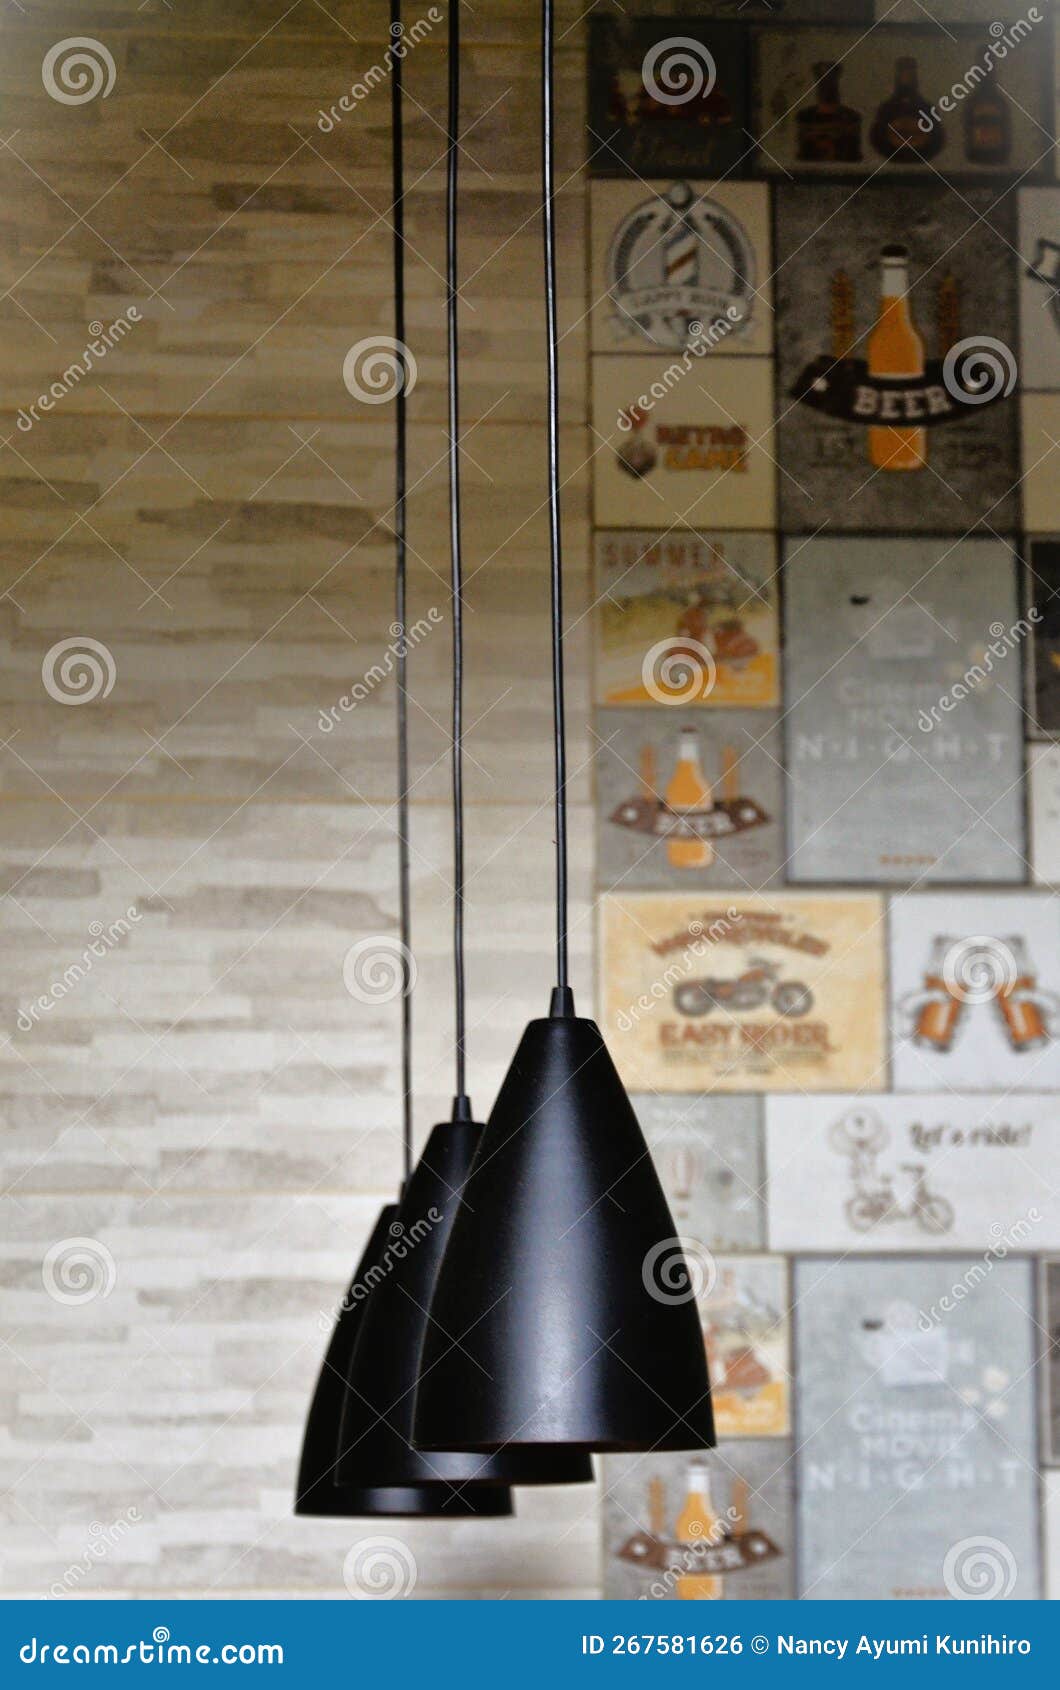 modern black lamps hanging from the ceiling decorating kitchen